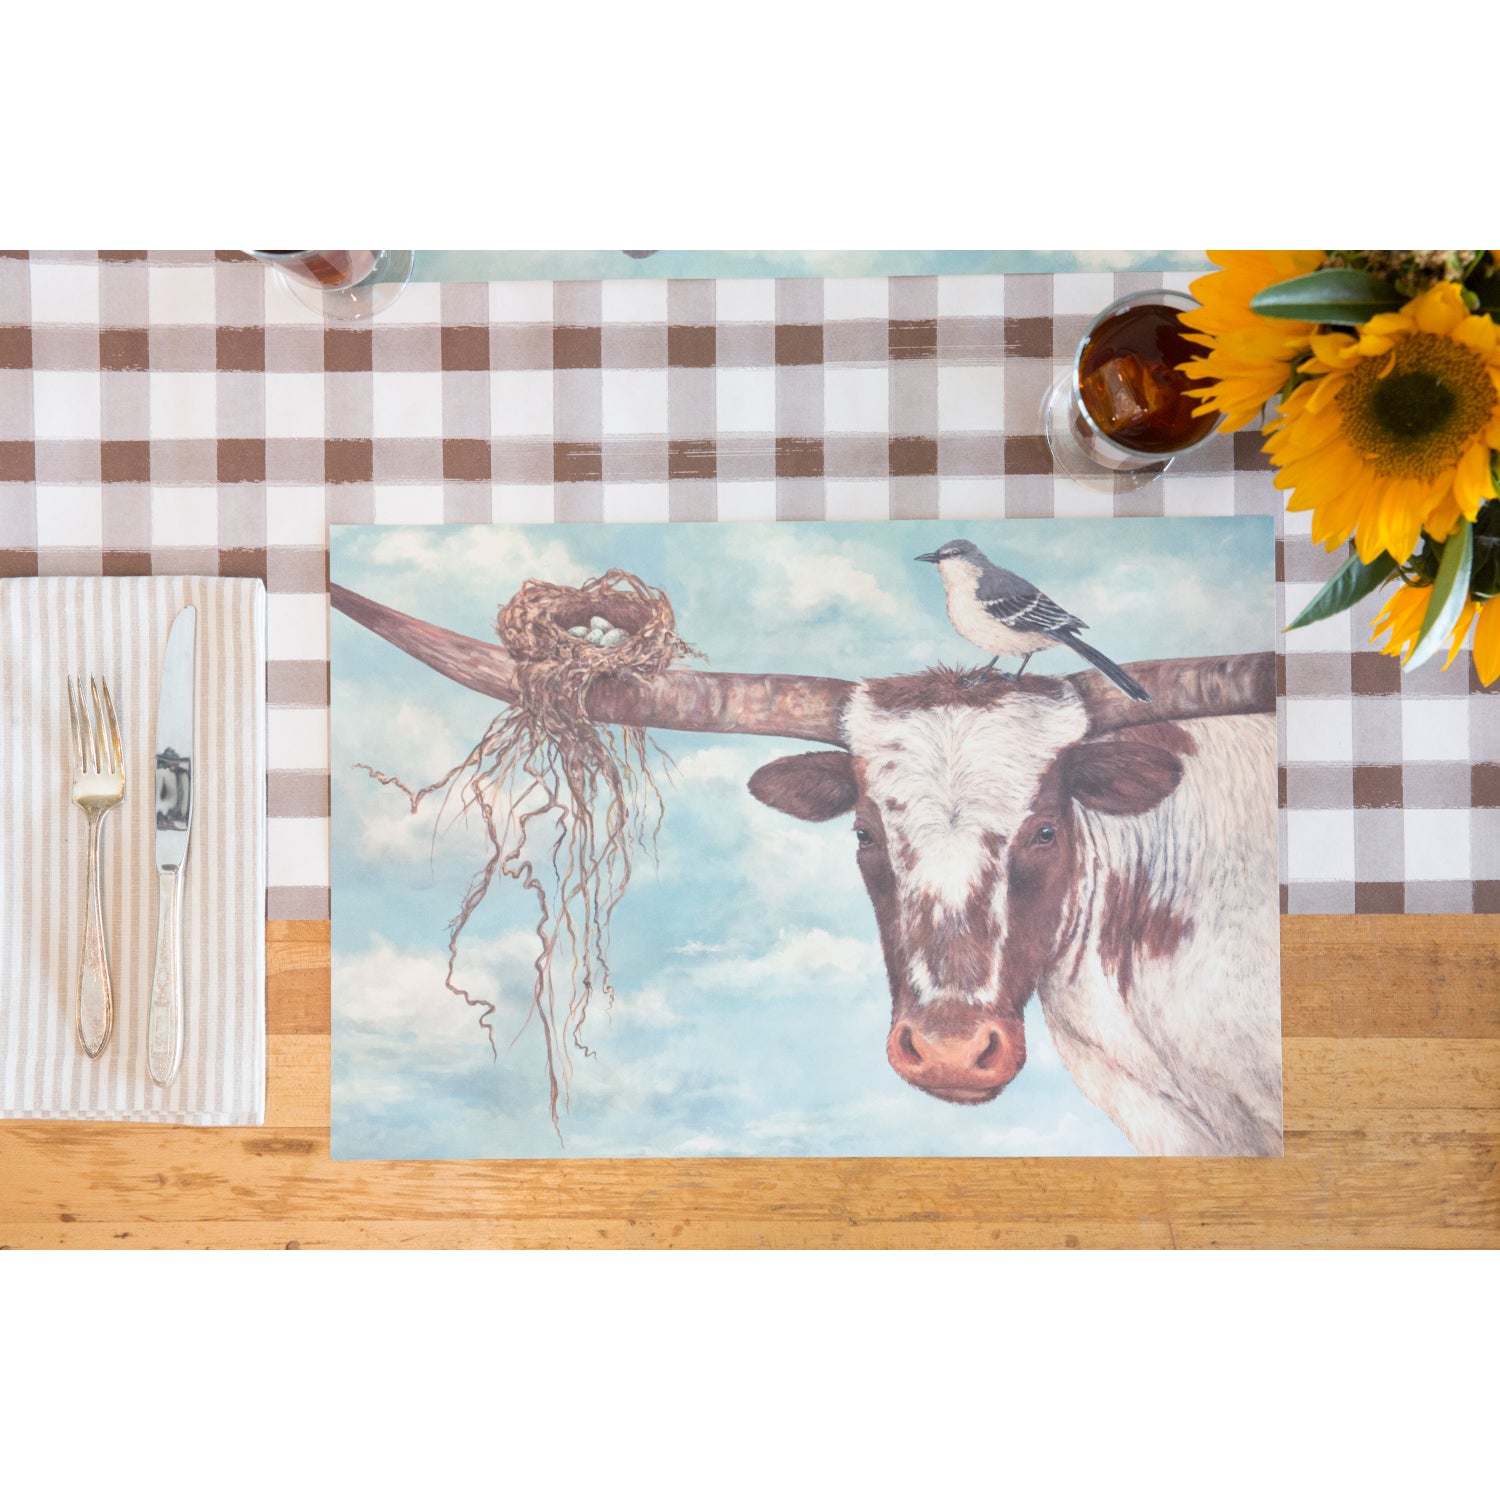 A place setting with Buford &amp; Agnes paper placemat on a Brown Painted Check Table Runner